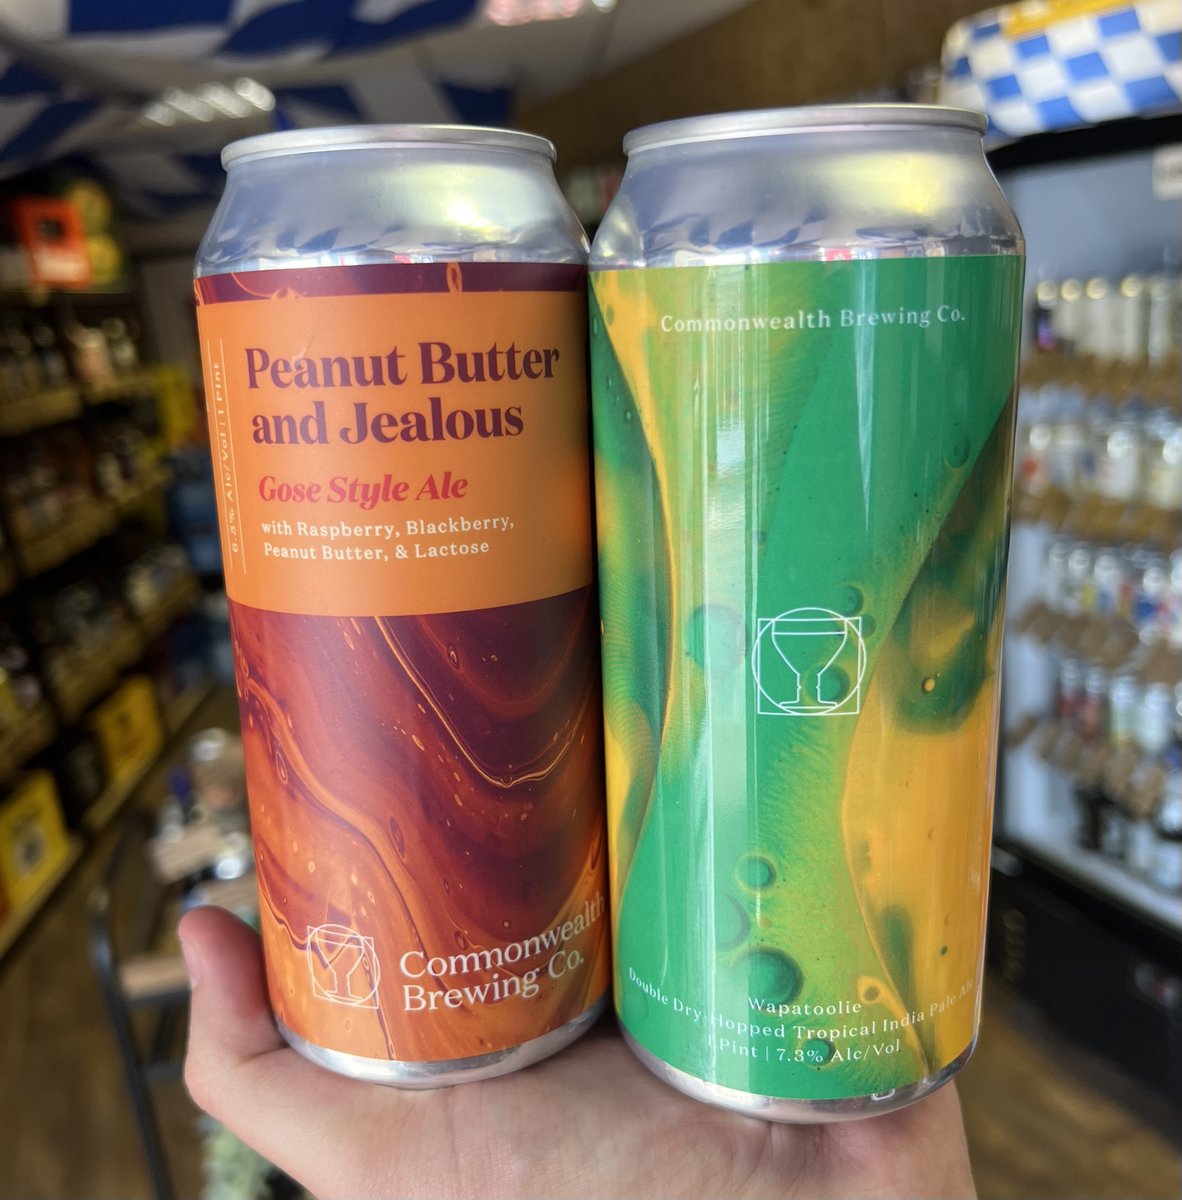 New In!

@CWBrewCo (Virginia🇺🇸)

🍺Peanut Butter and Jealous - Gose 6.5% - raspberry, blackberry, peanut butter and lactose. Phwoooooar!

🍺Wapatoolie - DDH IPA 7.3% - Tropical blond wheat IPA delivers a sweet Pineapple, Mango nose!

In the fridge now! Open 'till 6pm!

Prost!🍻